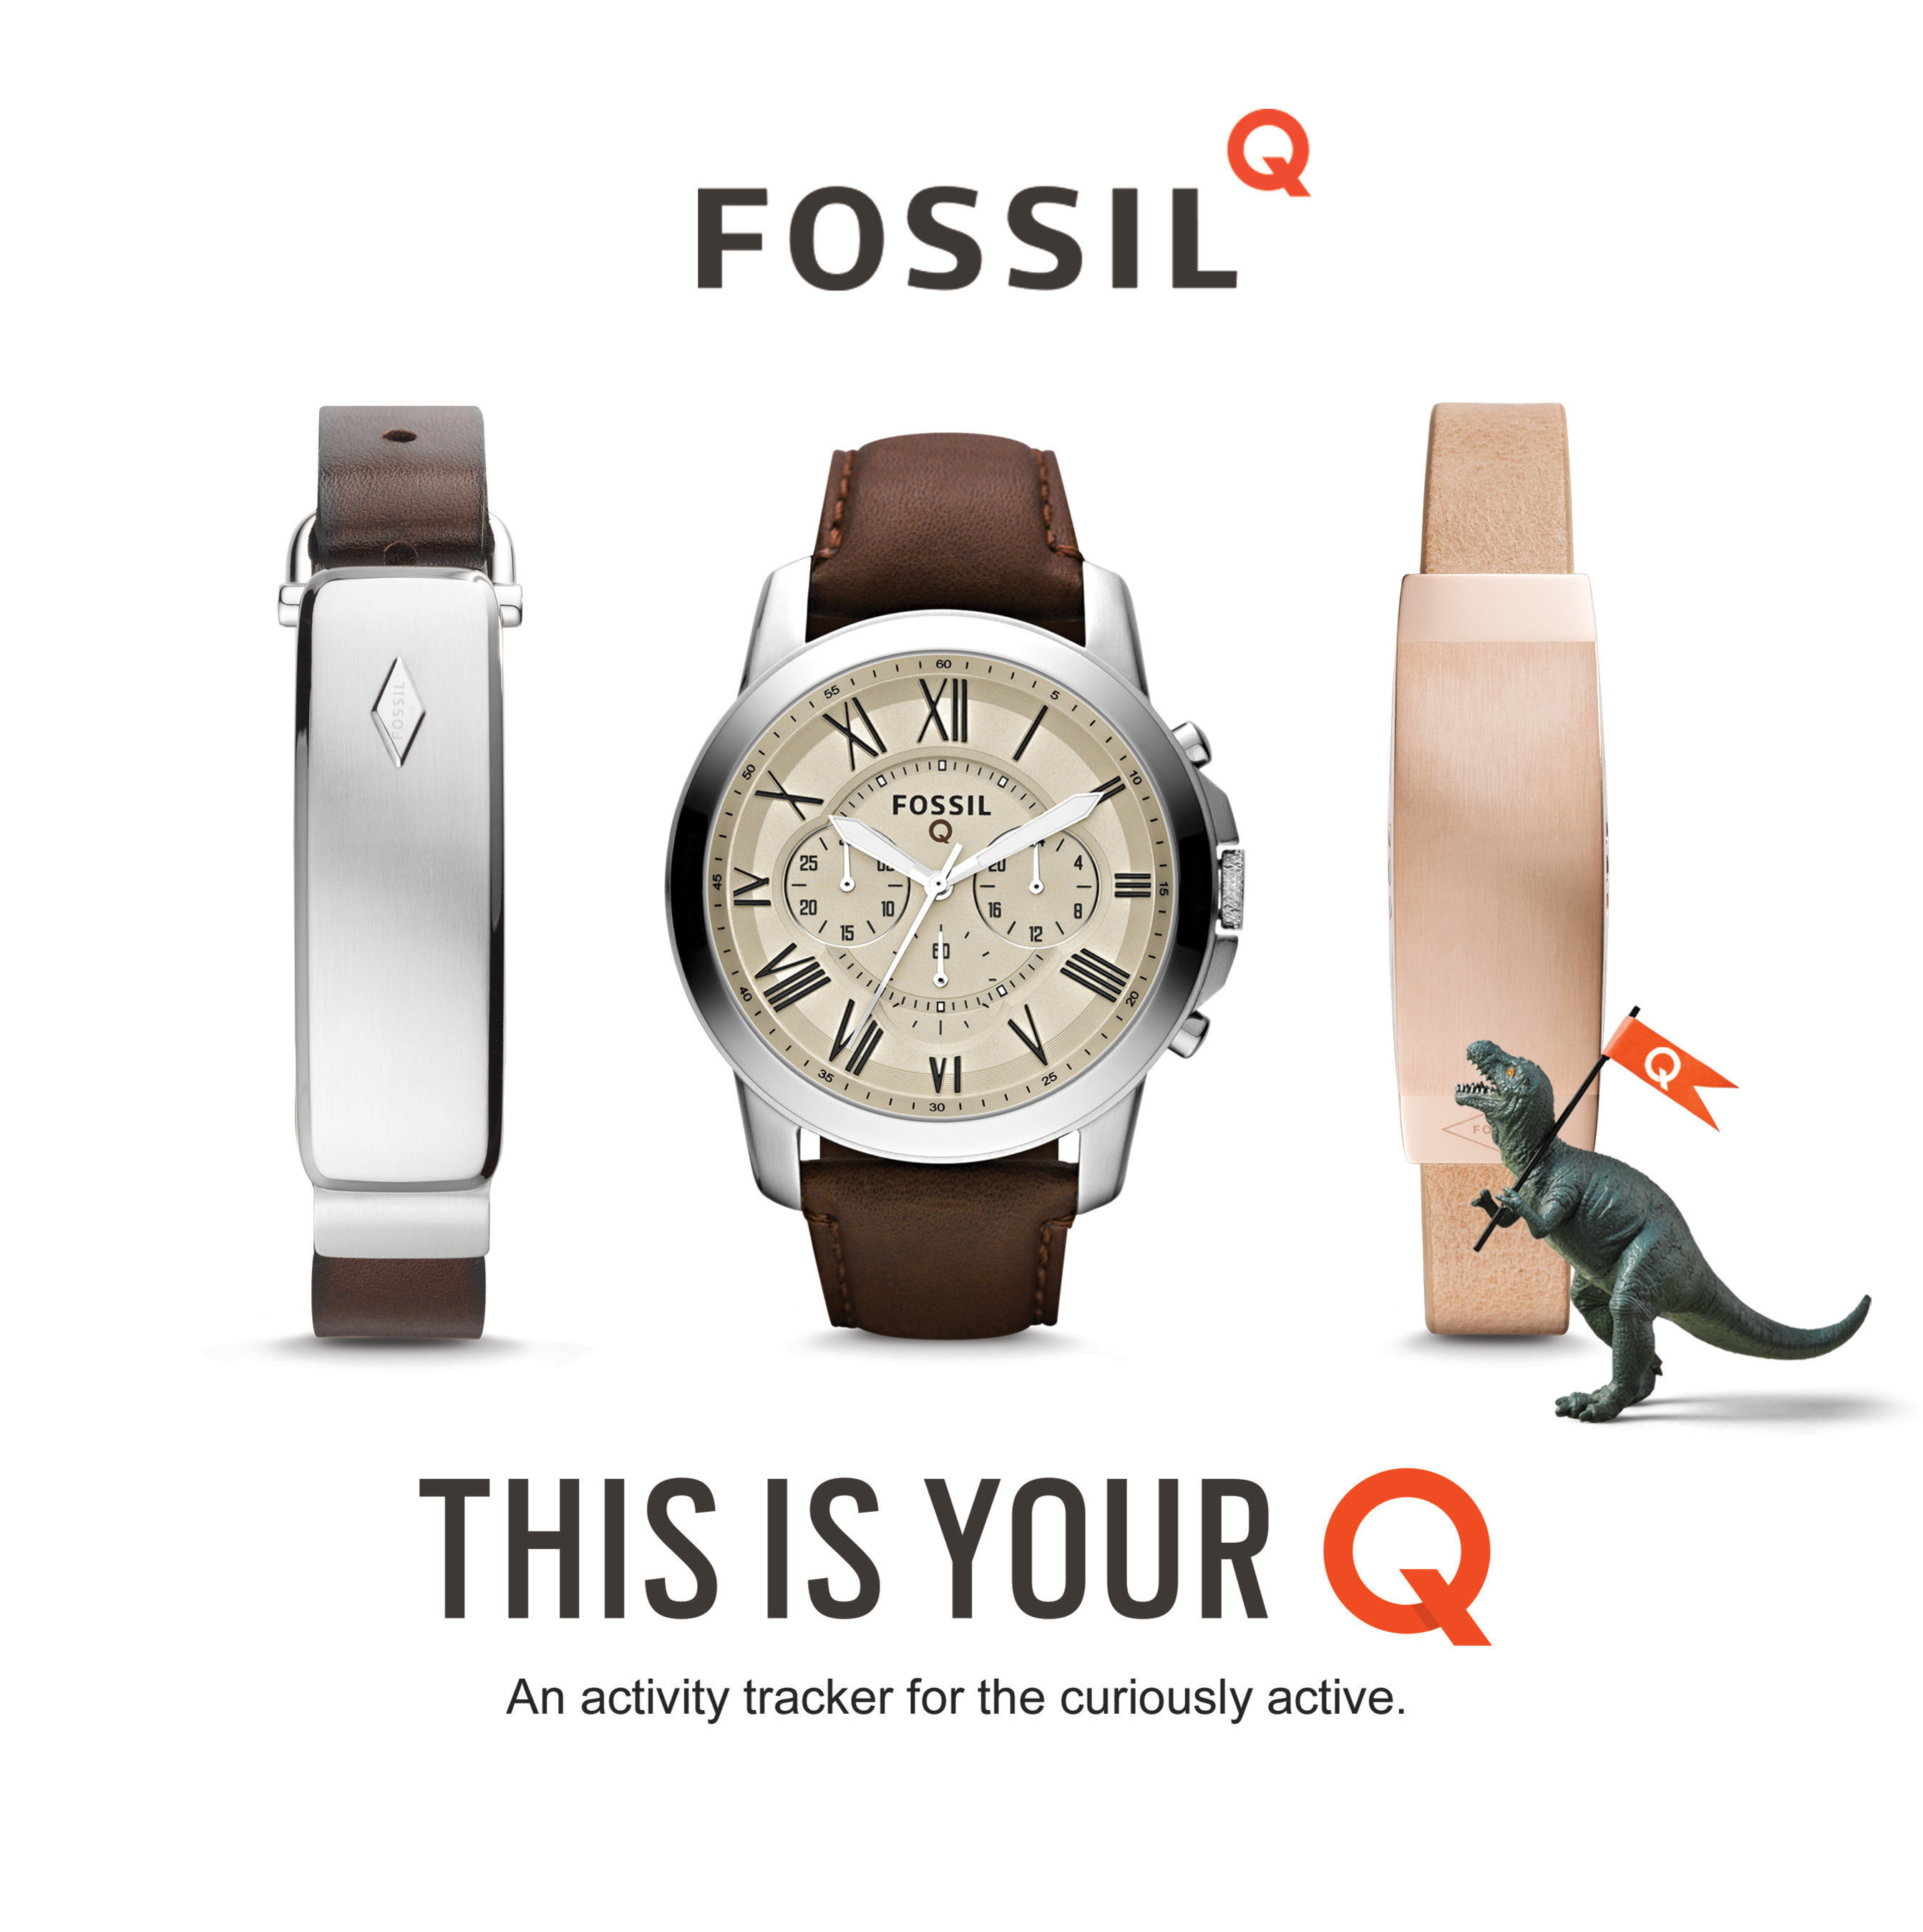 Introducing: Fossil Q. The connected accessory that fits your style, tracks your steps, and keeps you curious. With two types of connected watches (both display and non-display) and two styles of connected bracelets (one for men and one for women), there's something for everyone. Fashion meets function in stores October 25.